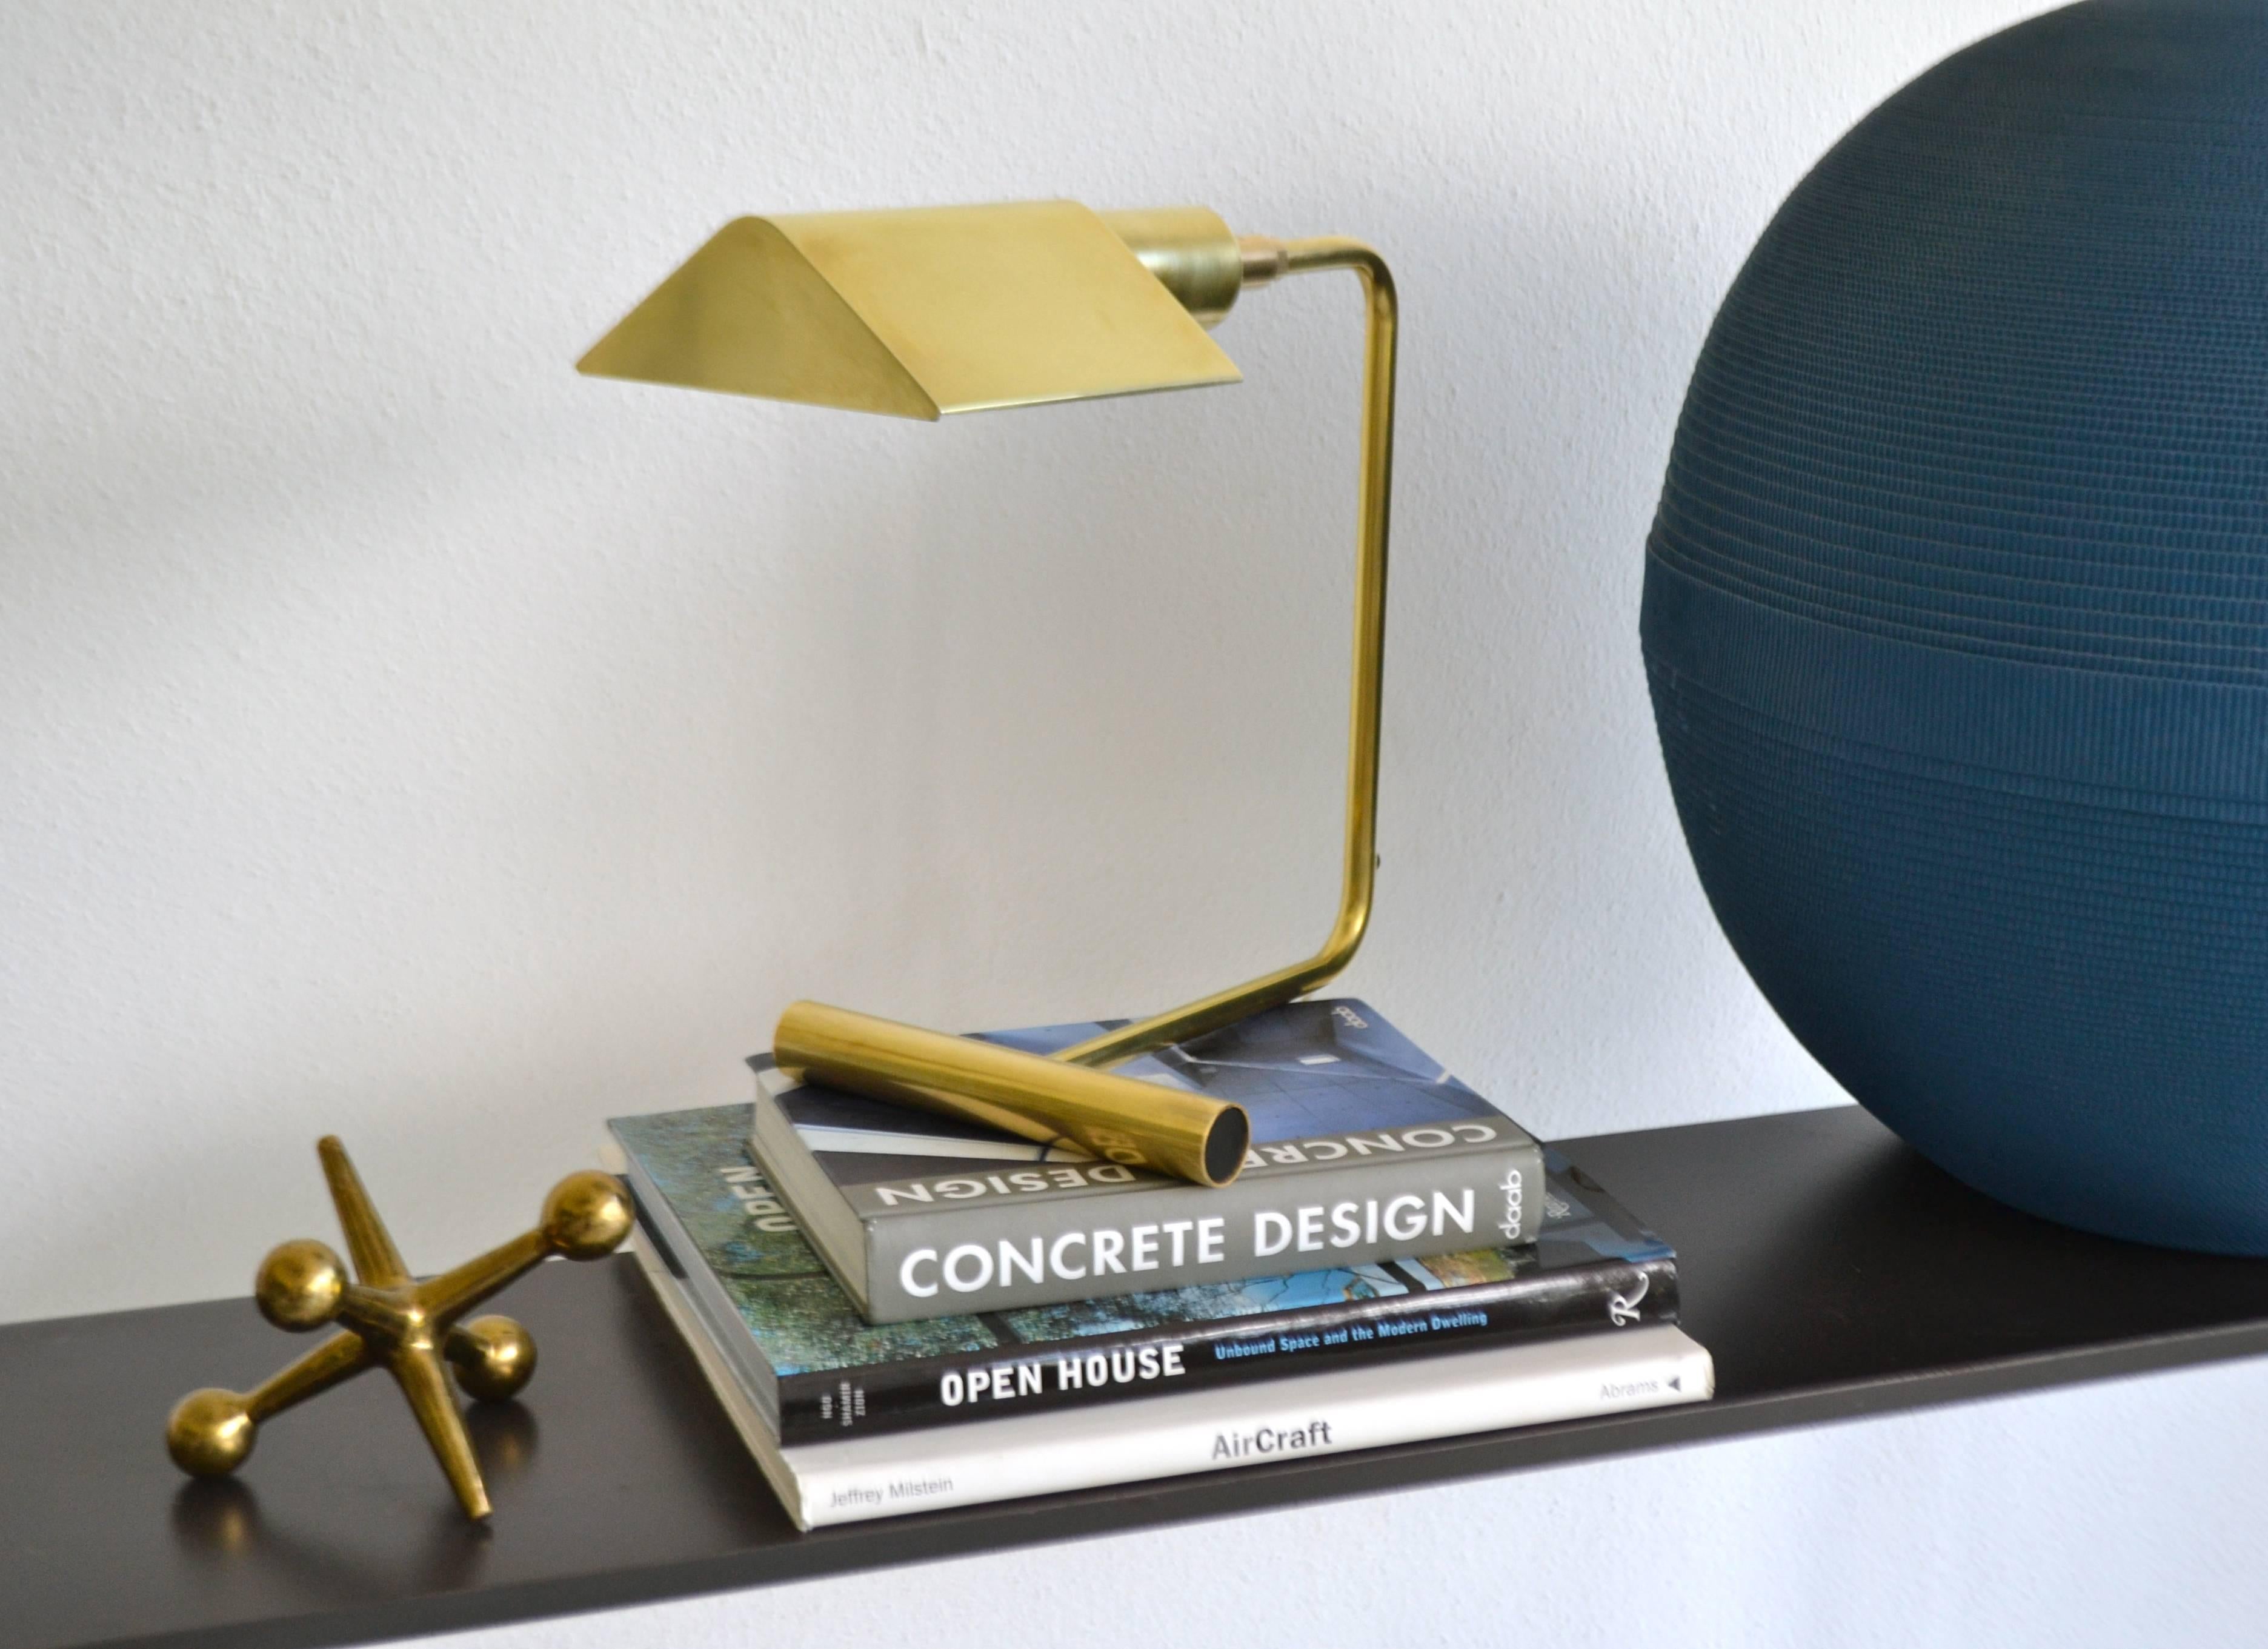 Sculptural midcentury polished brass desk lamp by OMI, circa 1960s-1970s. This architectural table lamp is designed with an articulating shade and a dimmer switch for directional and adjustable lighting. The Koch & Lowy desk lamp is crafted with a